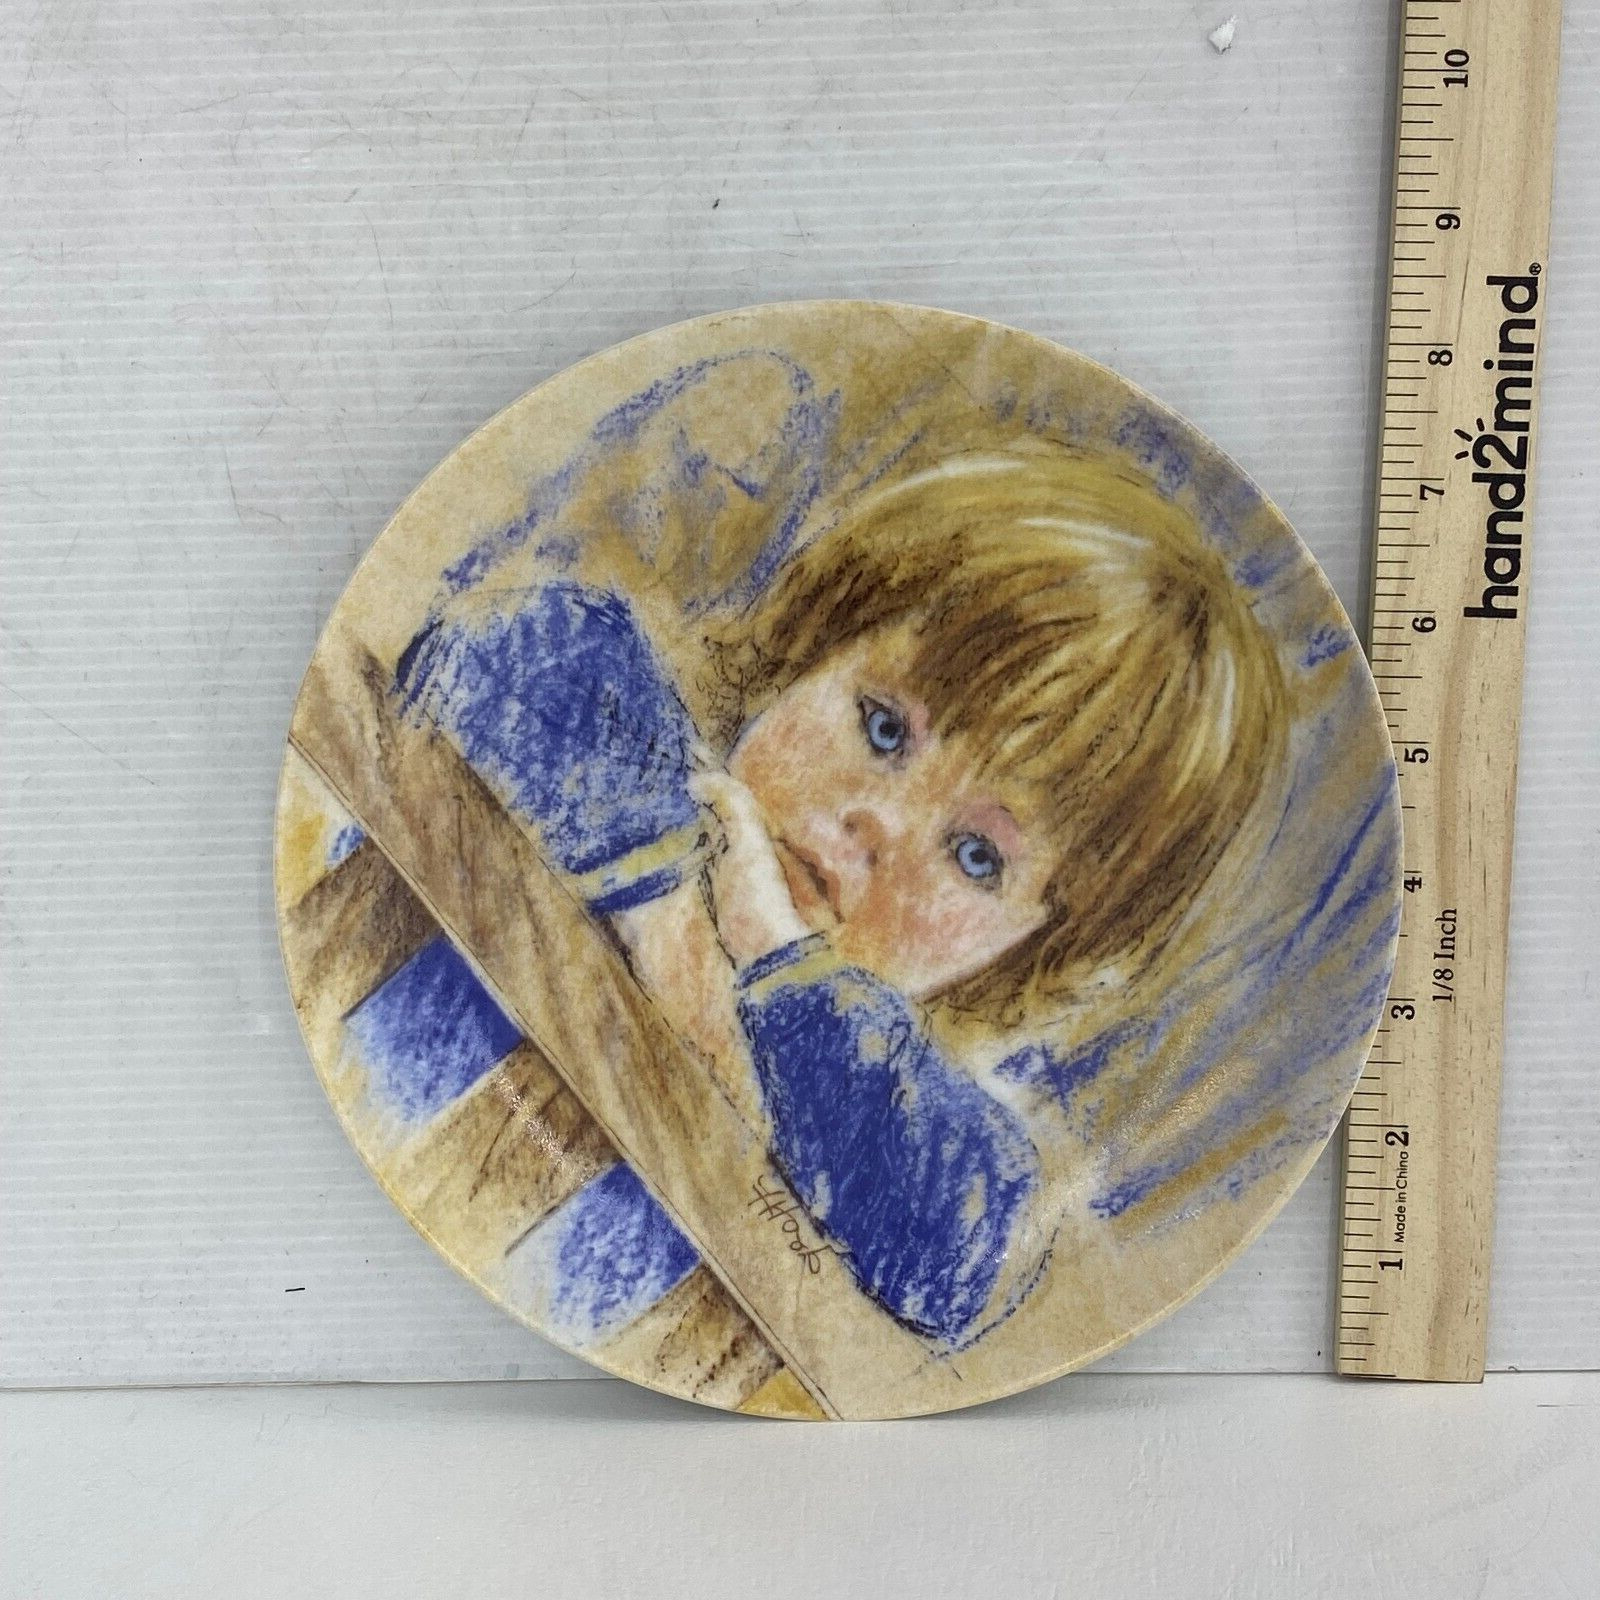 1985 Edwin Knowles Daydreaming Frances Hook Legacy Series Collectors Plate Used